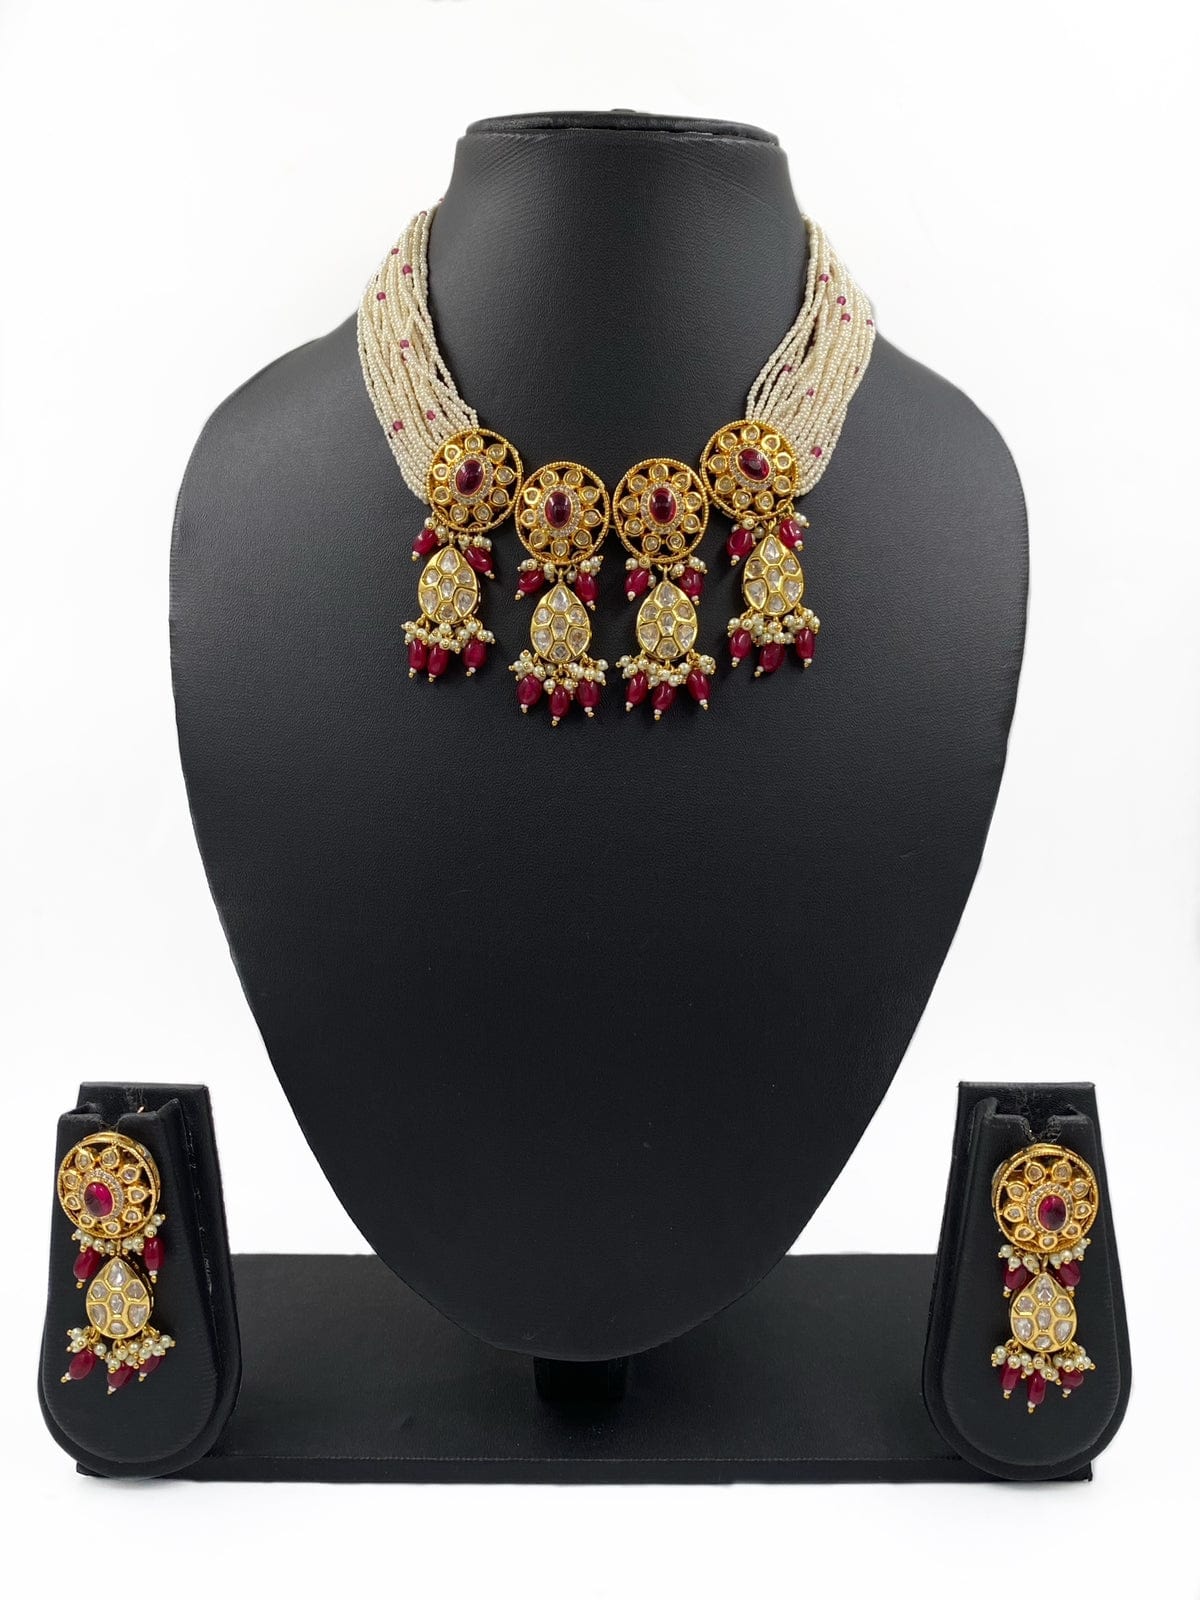 Ruby Pearl Jadau Choker Necklace Set in Gold Plated Silver NS 006